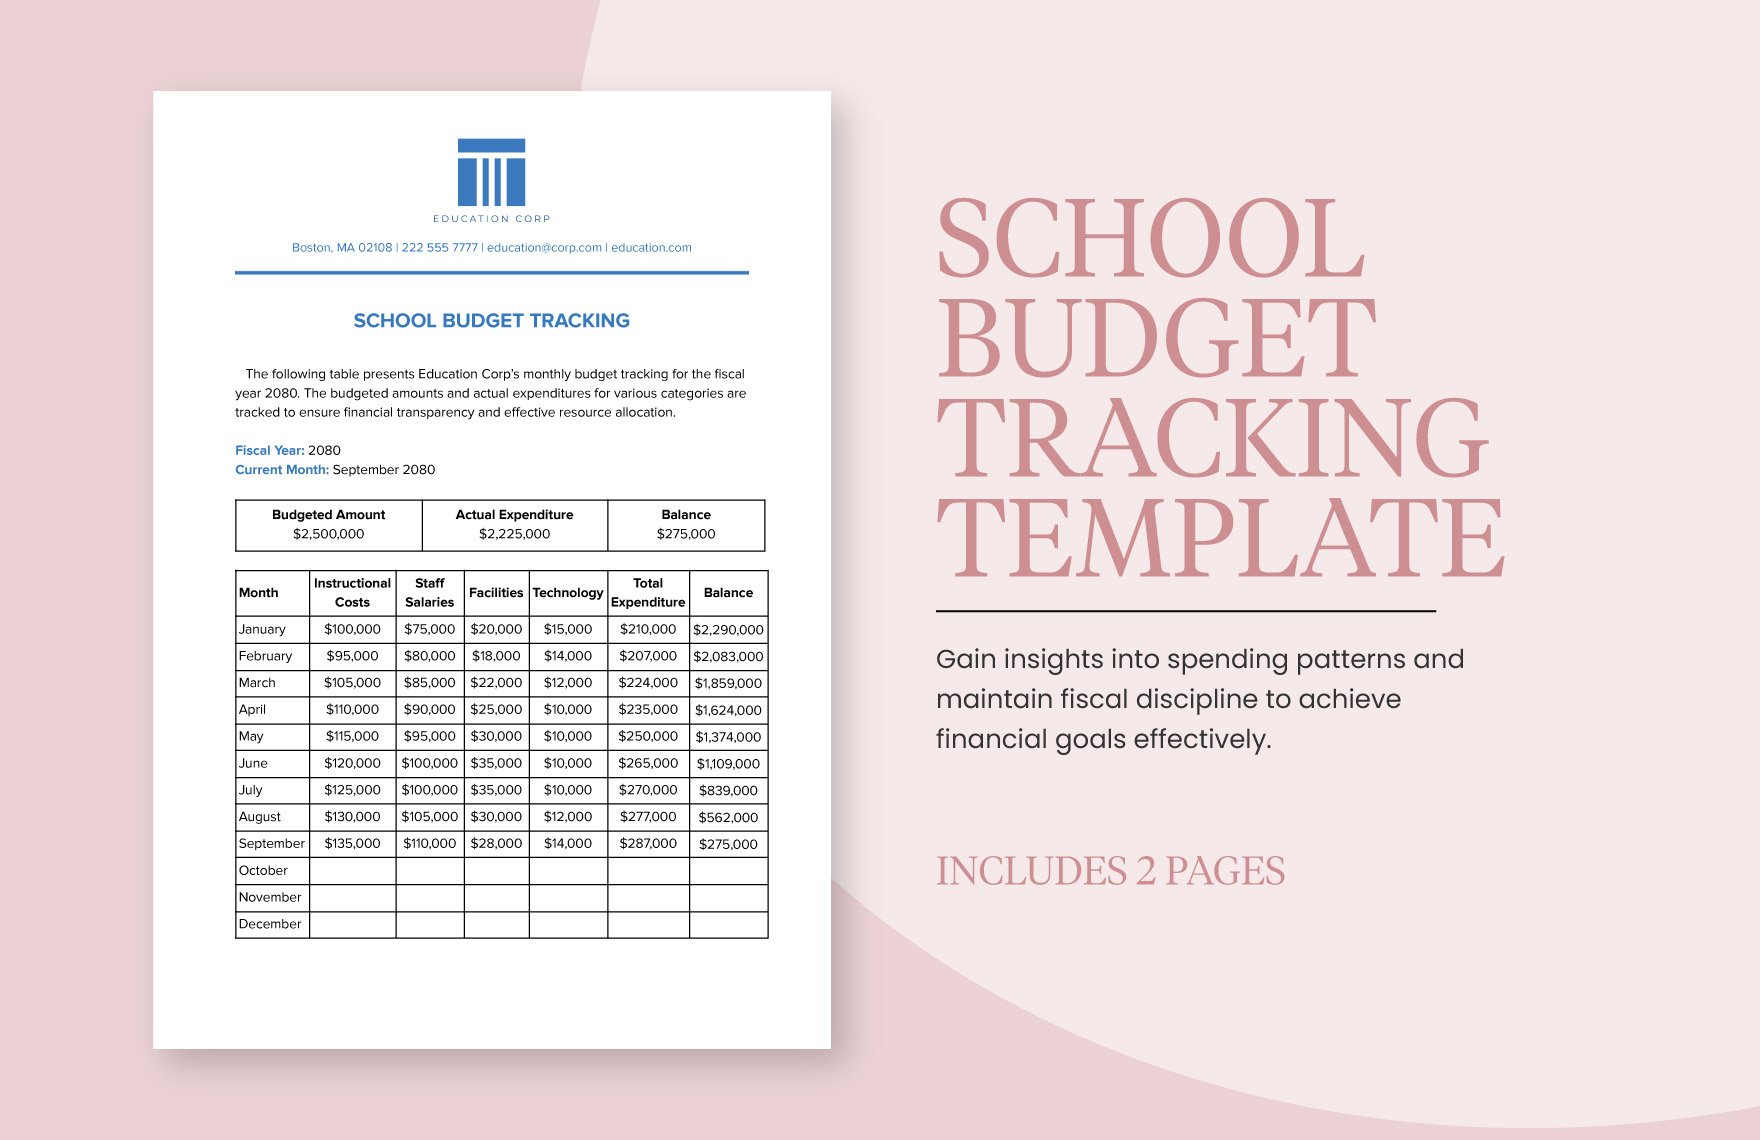 School Budget Tracking Template in Word, Google Docs, PDF